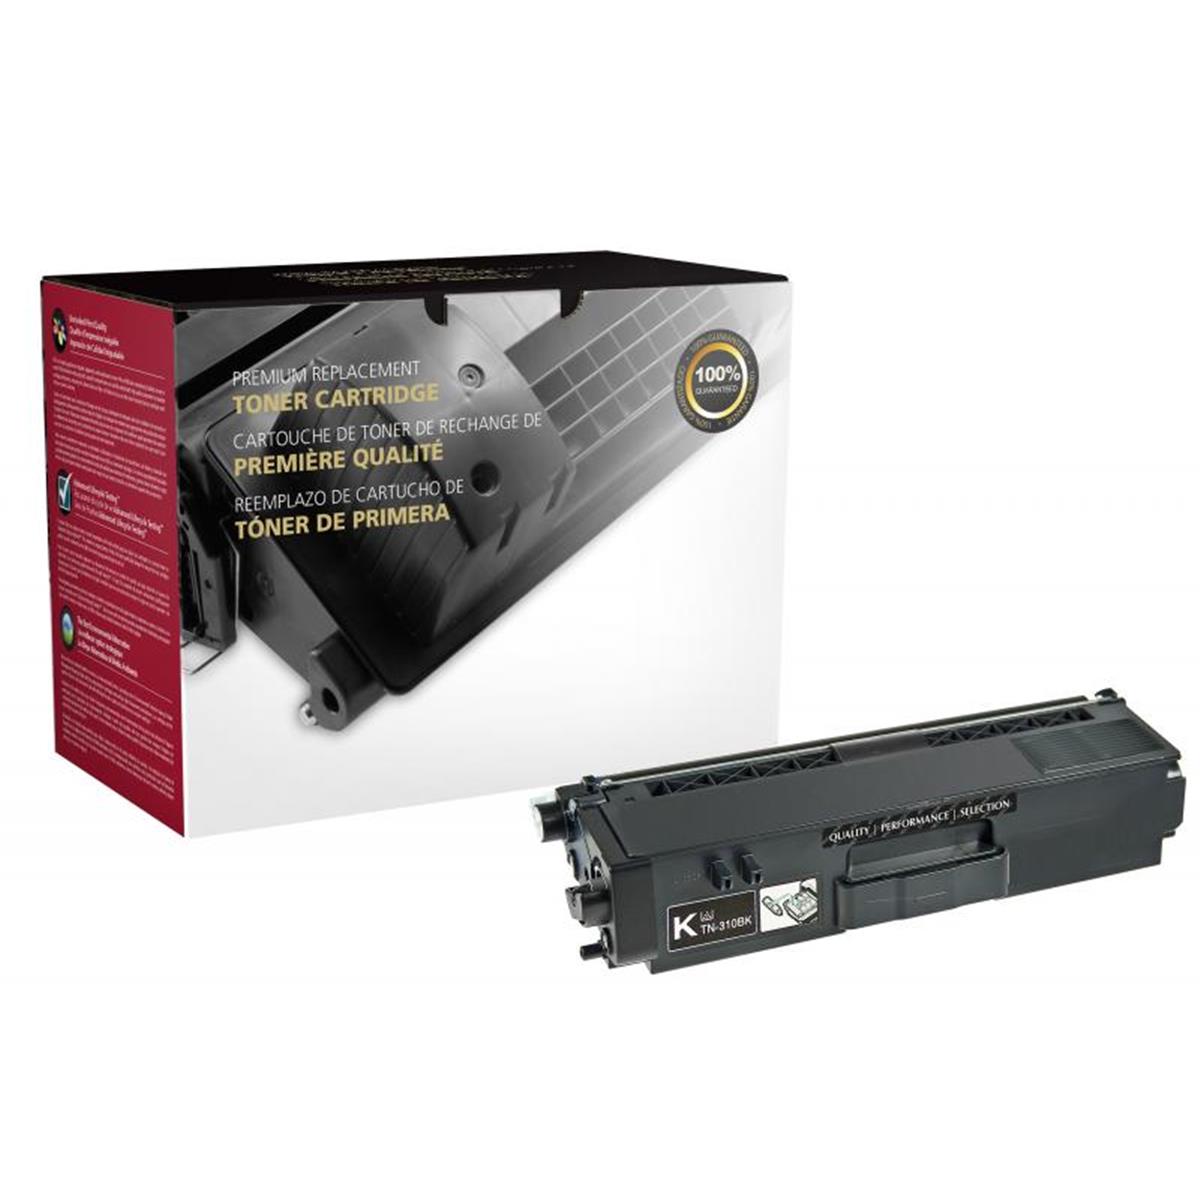 Picture of Brother 200592P Black Toner Cartridge for TN310